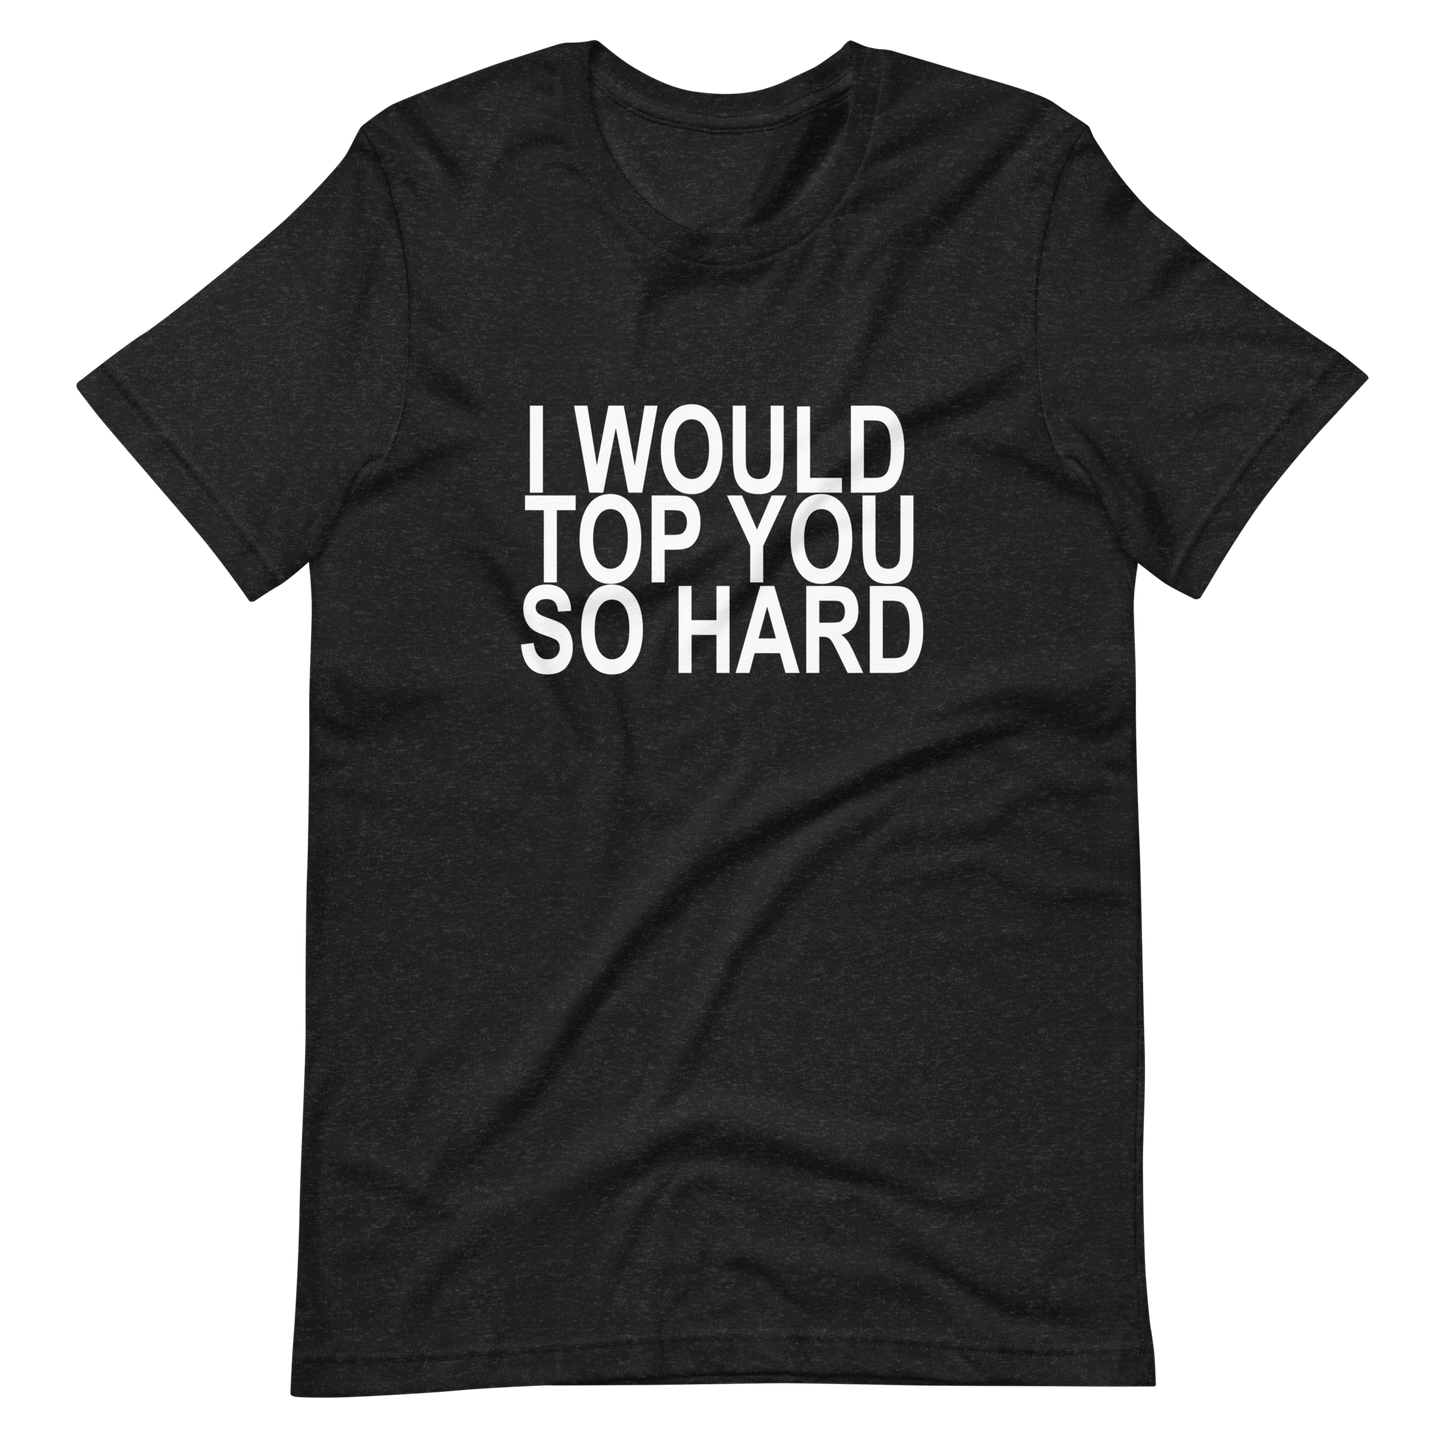 I Would Top You So Hard T-Shirt - Black Heather